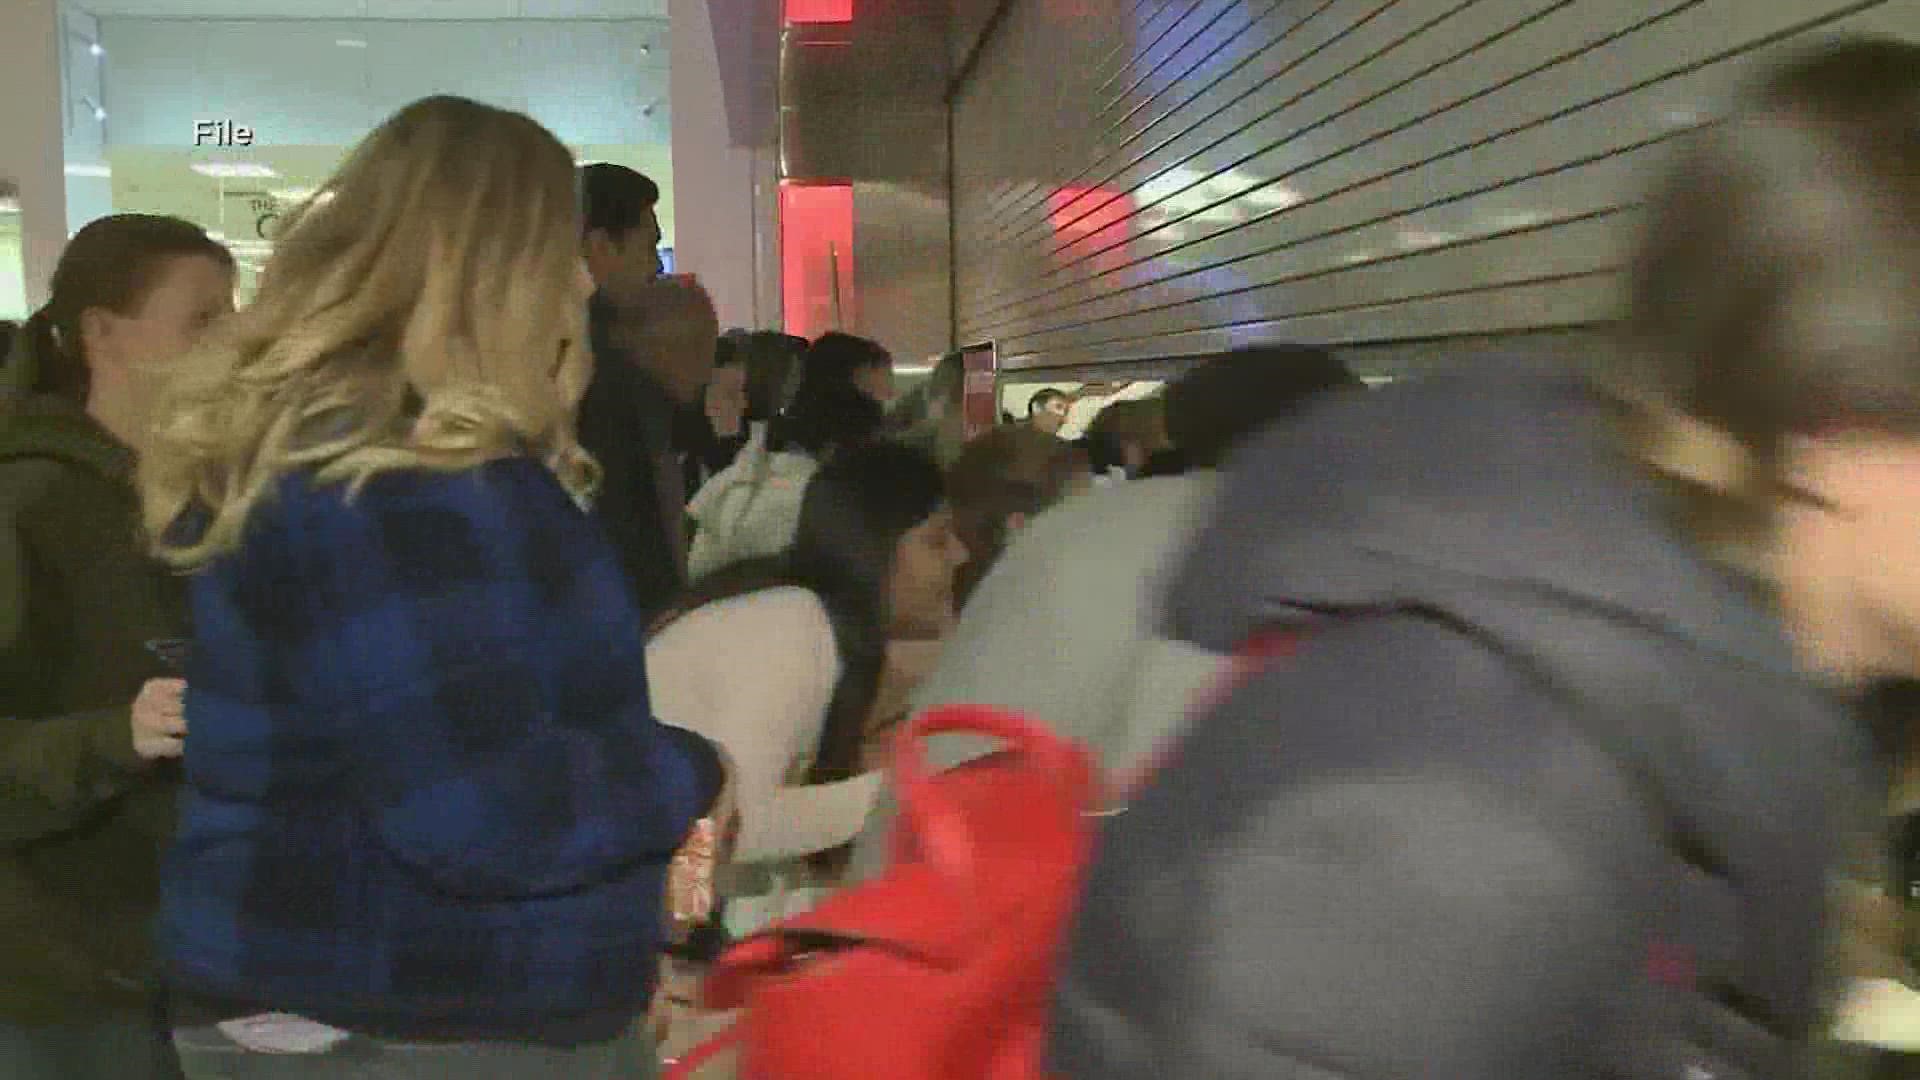 Fresh off a turkey hangover, Houstonians hit the stores on Black Friday looking to snag deep discounts.